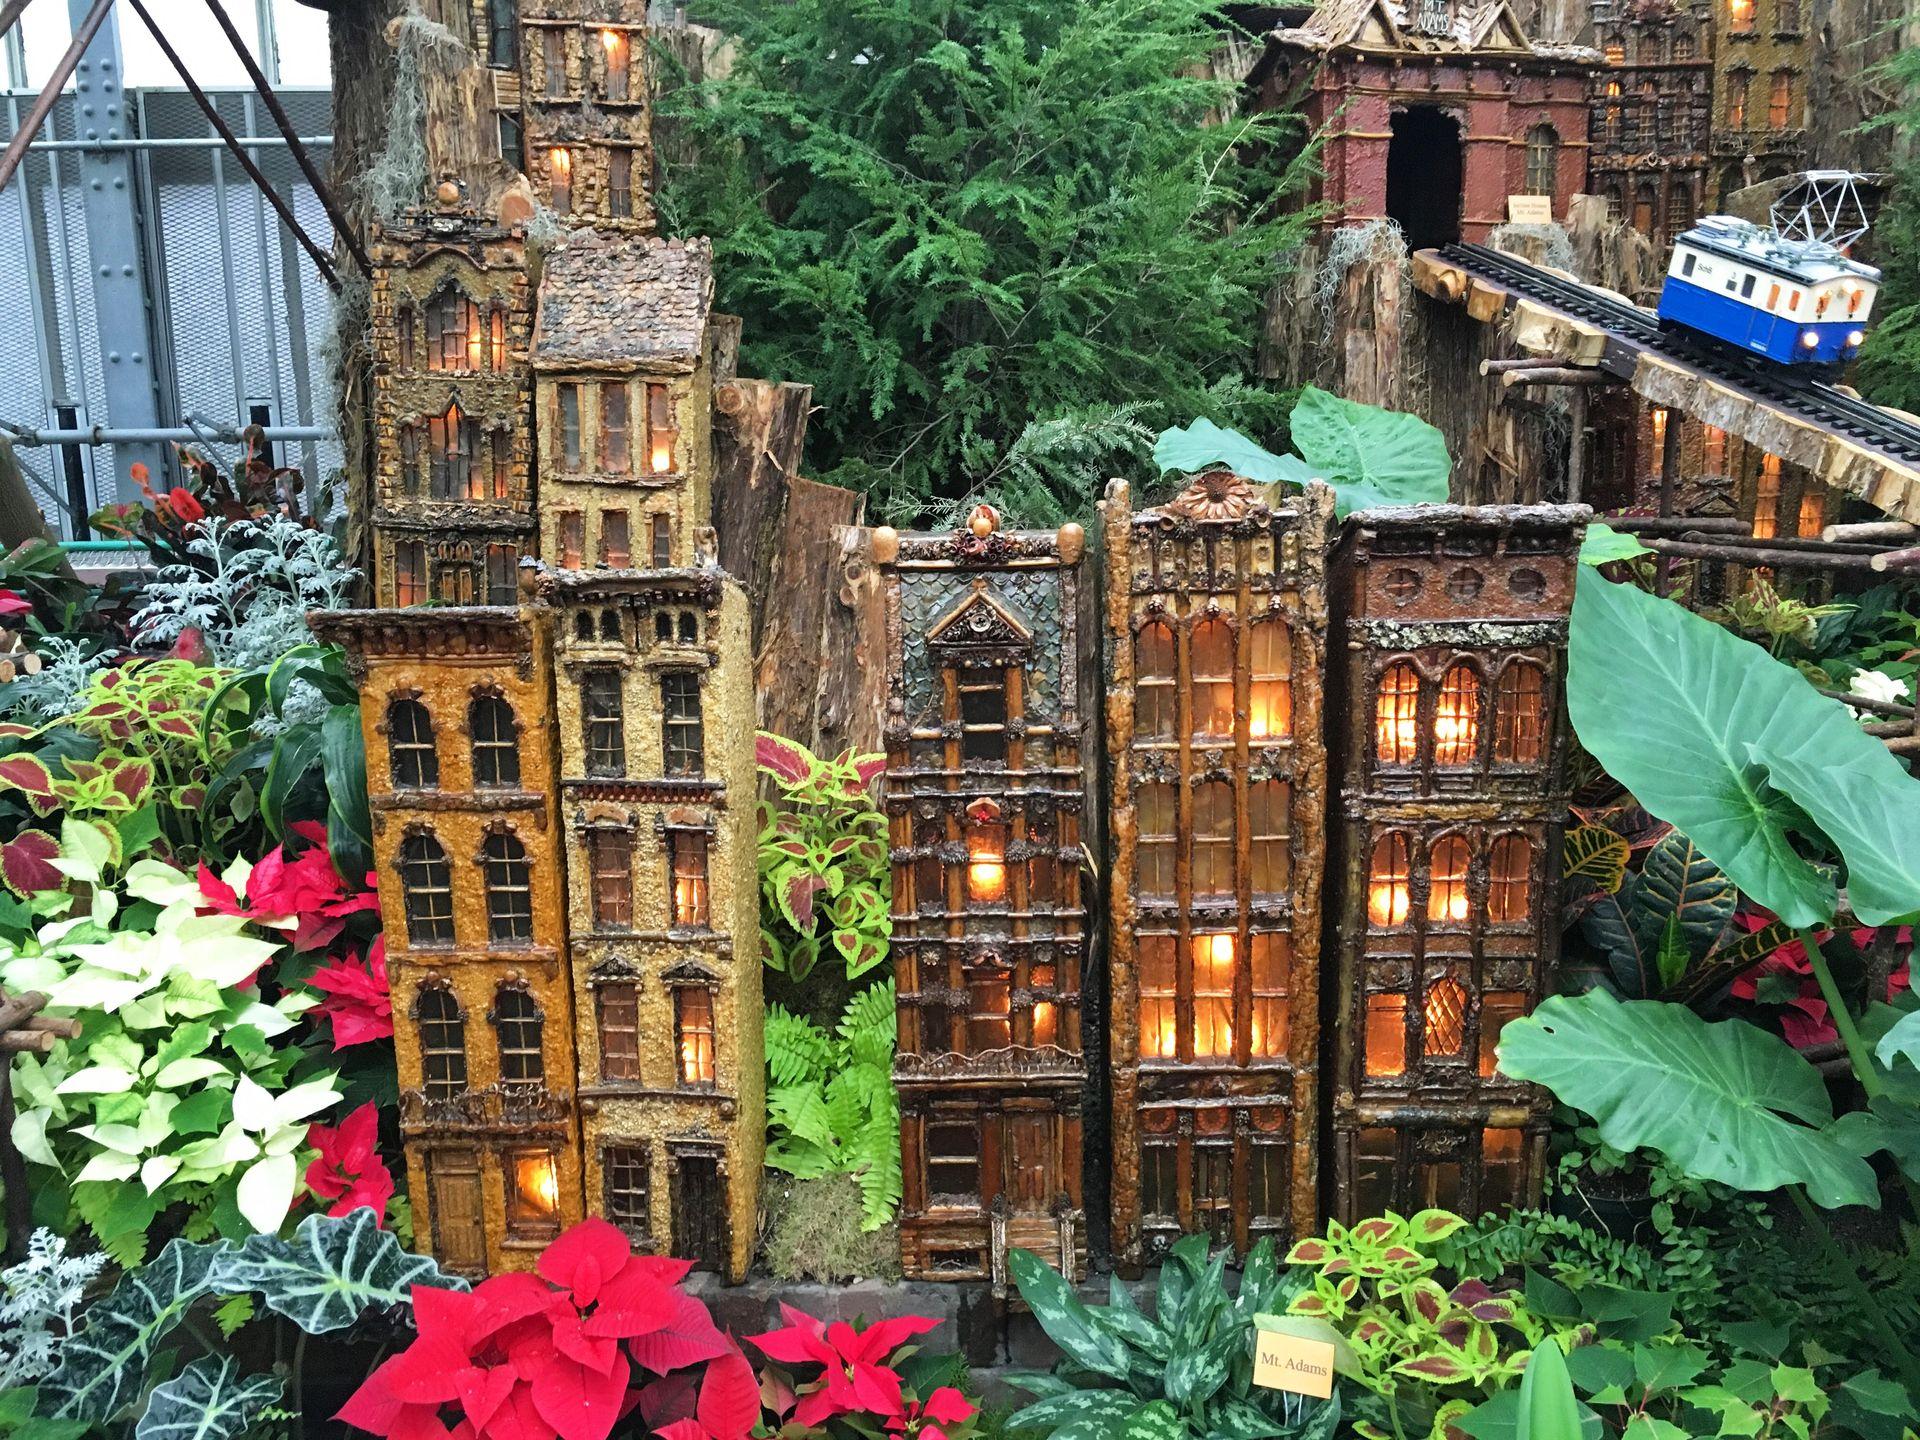 A Christmas display at the Krohn Conservatory that features tiny buildings among the plants.